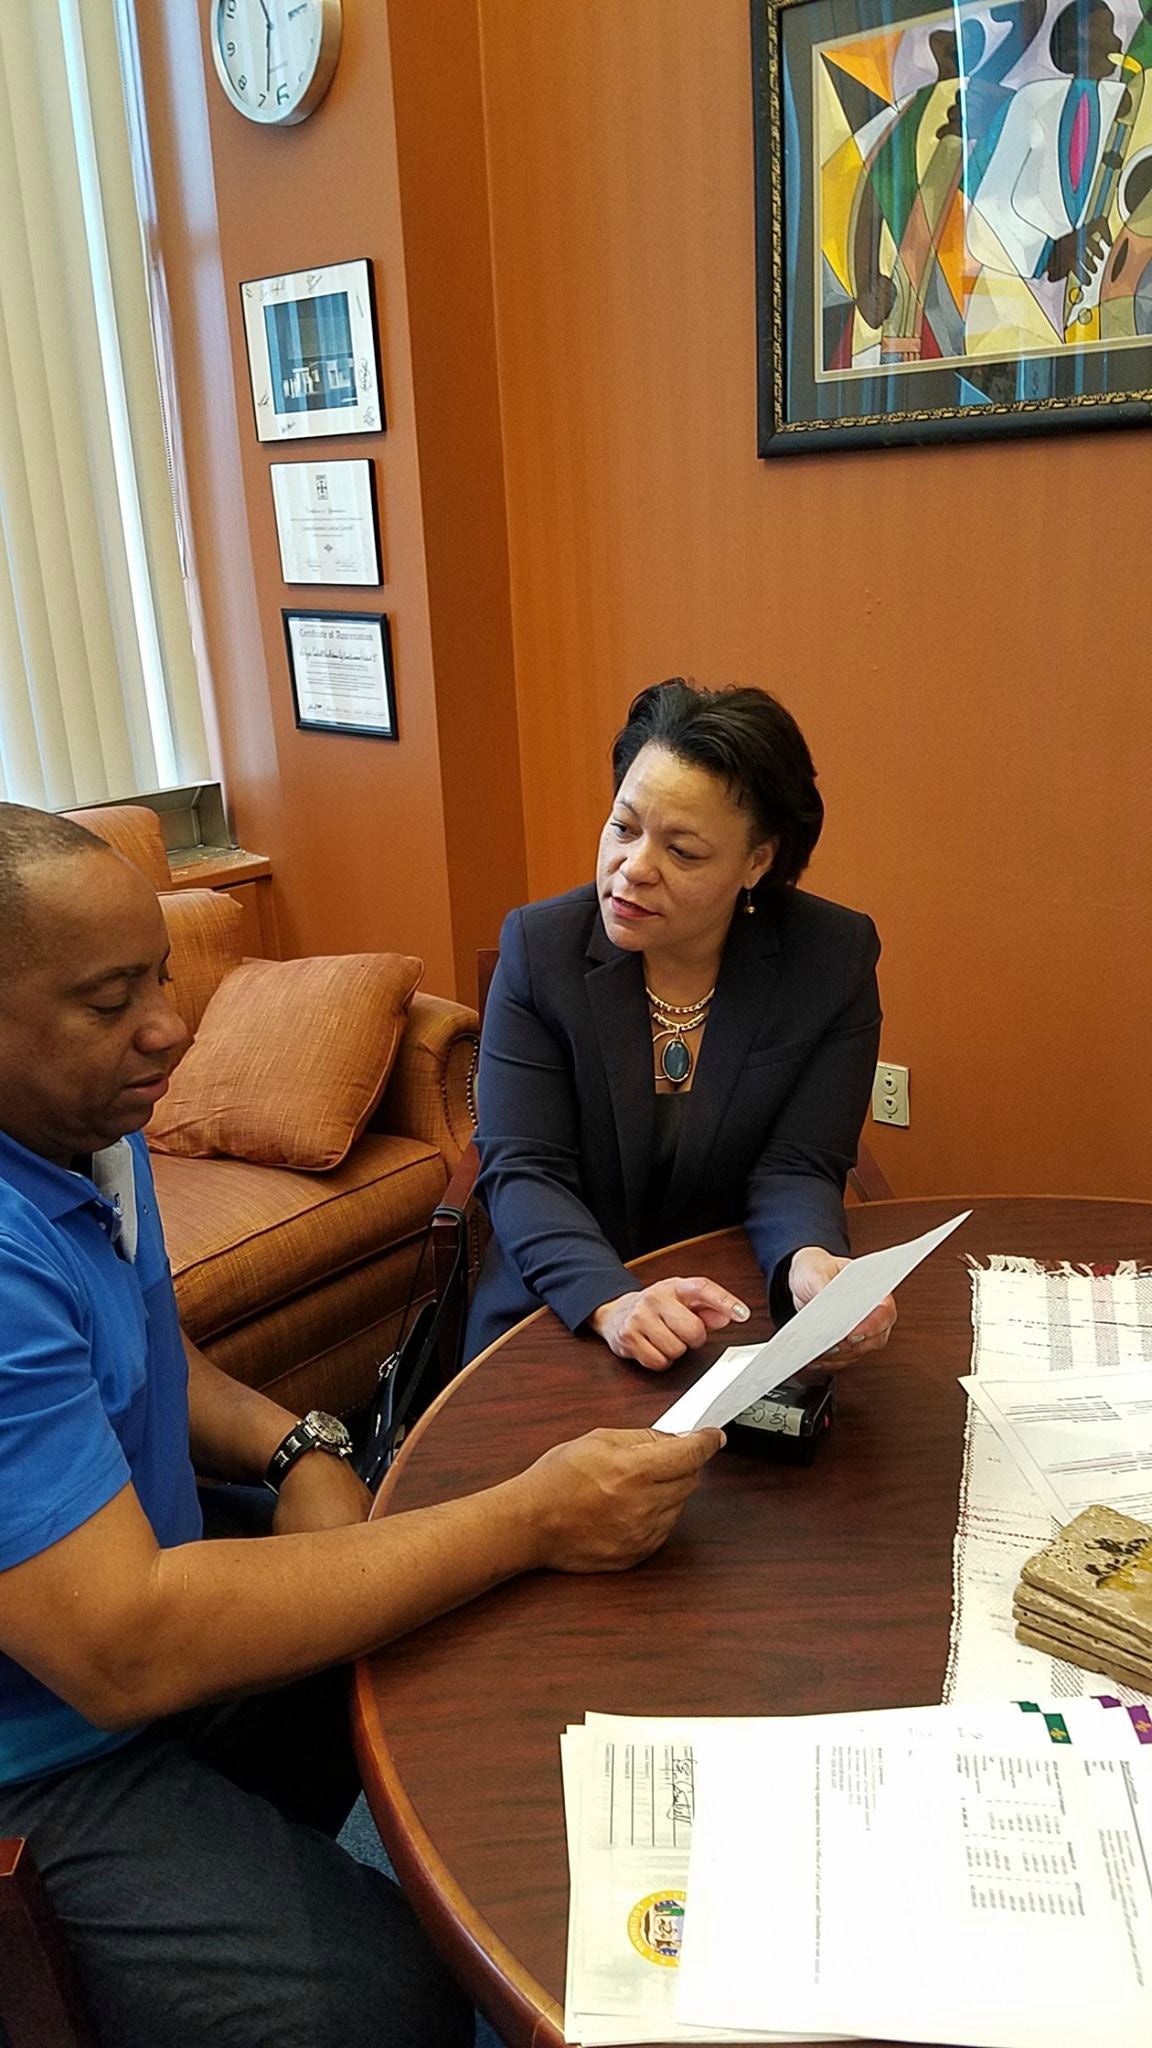 12 Things To Know About LaToya Cantrell, The First Black Woman Mayor Of New Orleans